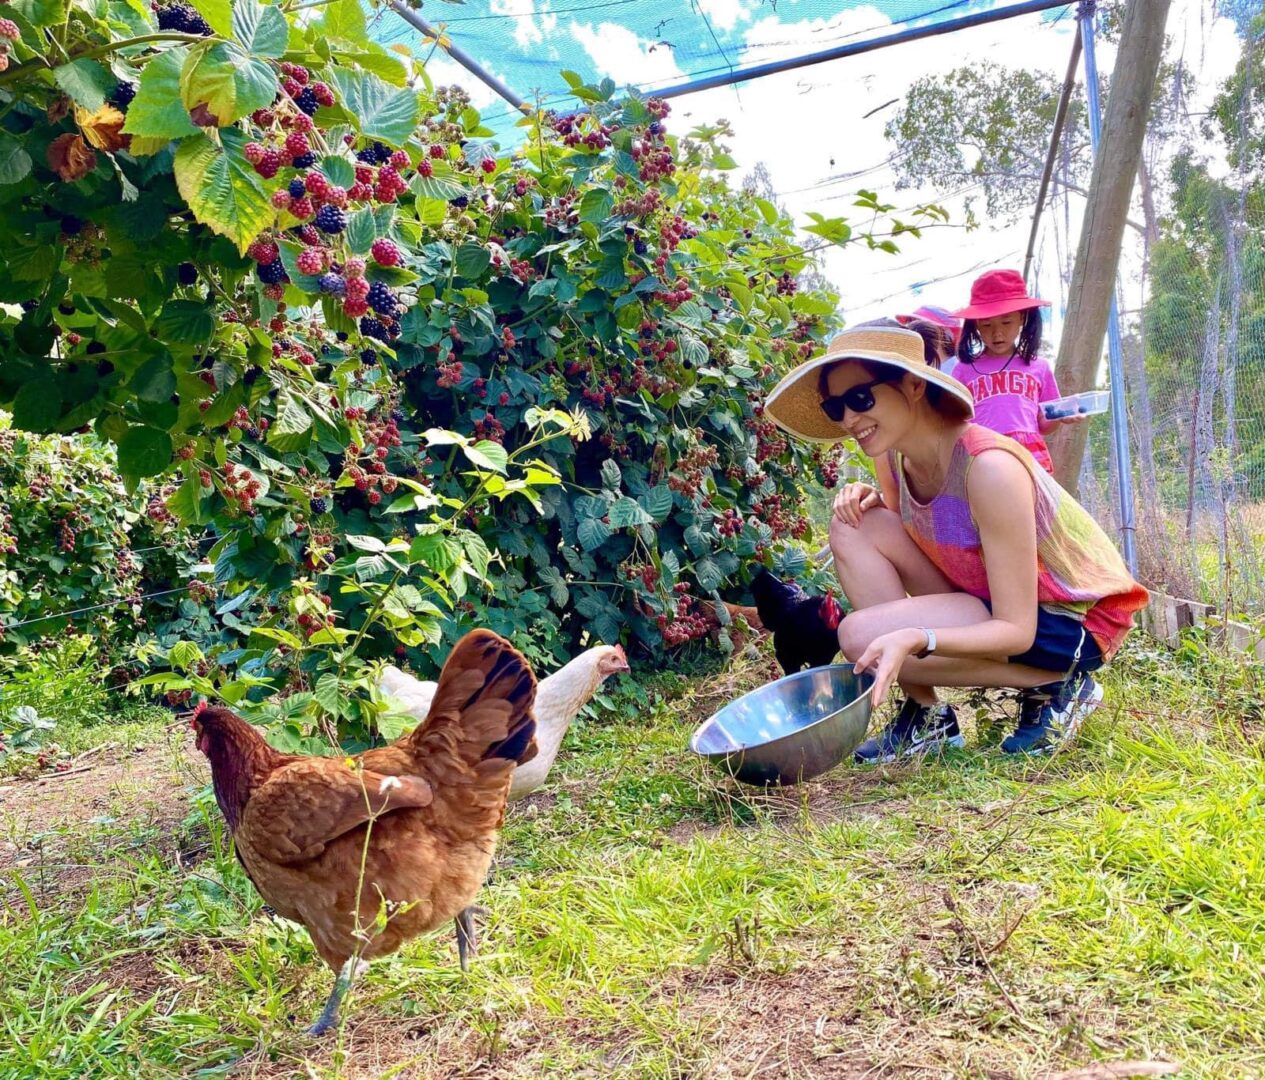 A Berry Good Time: Farm Adventure with the Kids